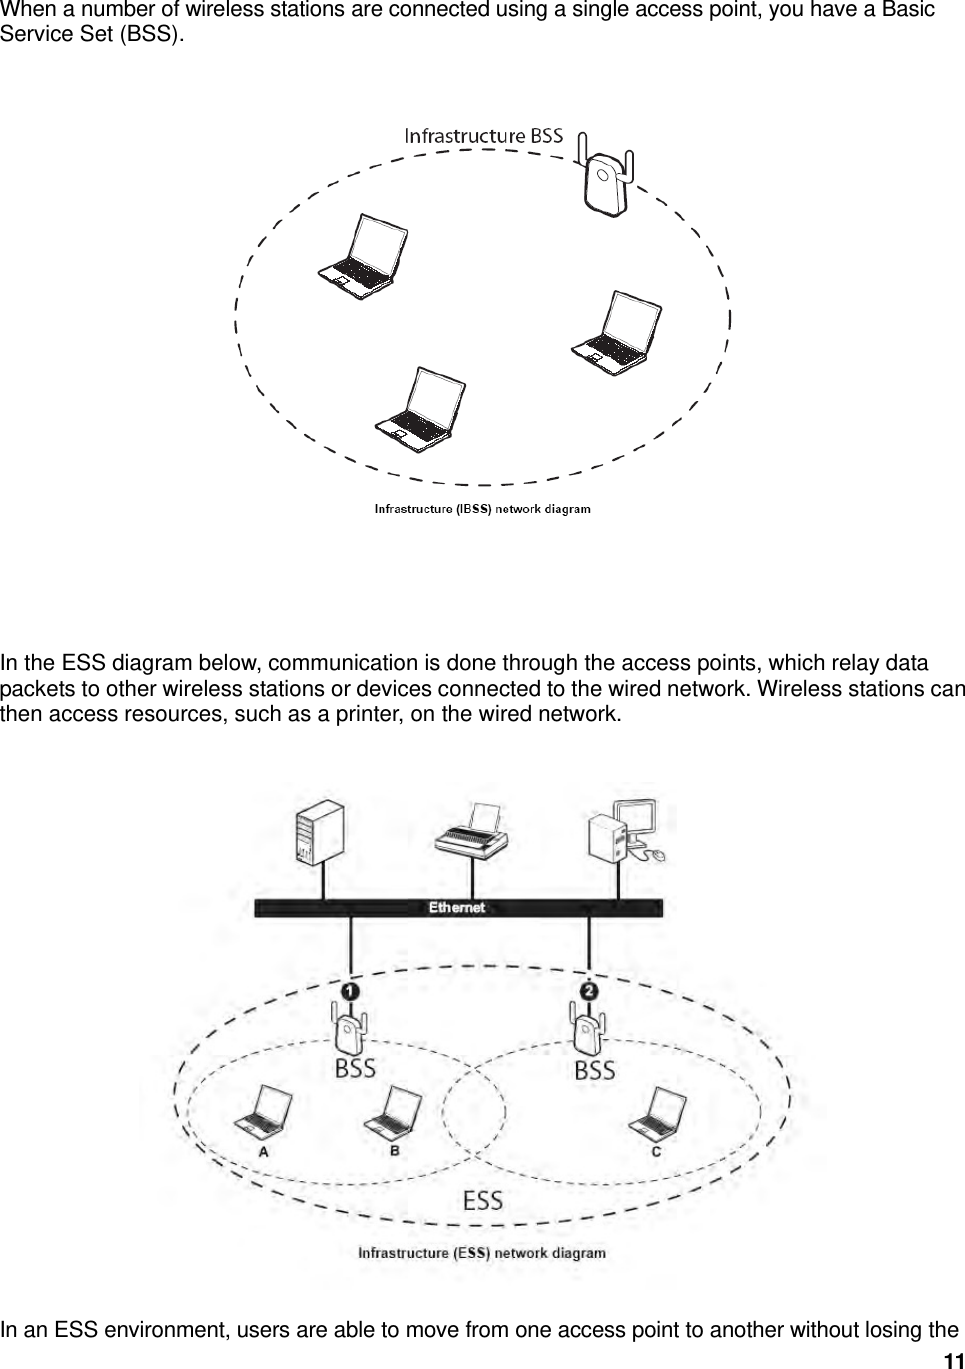 11  When a number of wireless stations are connected using a single access point, you have a Basic Service Set (BSS).         In the ESS diagram below, communication is done through the access points, which relay data packets to other wireless stations or devices connected to the wired network. Wireless stations can then access resources, such as a printer, on the wired network.     In an ESS environment, users are able to move from one access point to another without losing the 